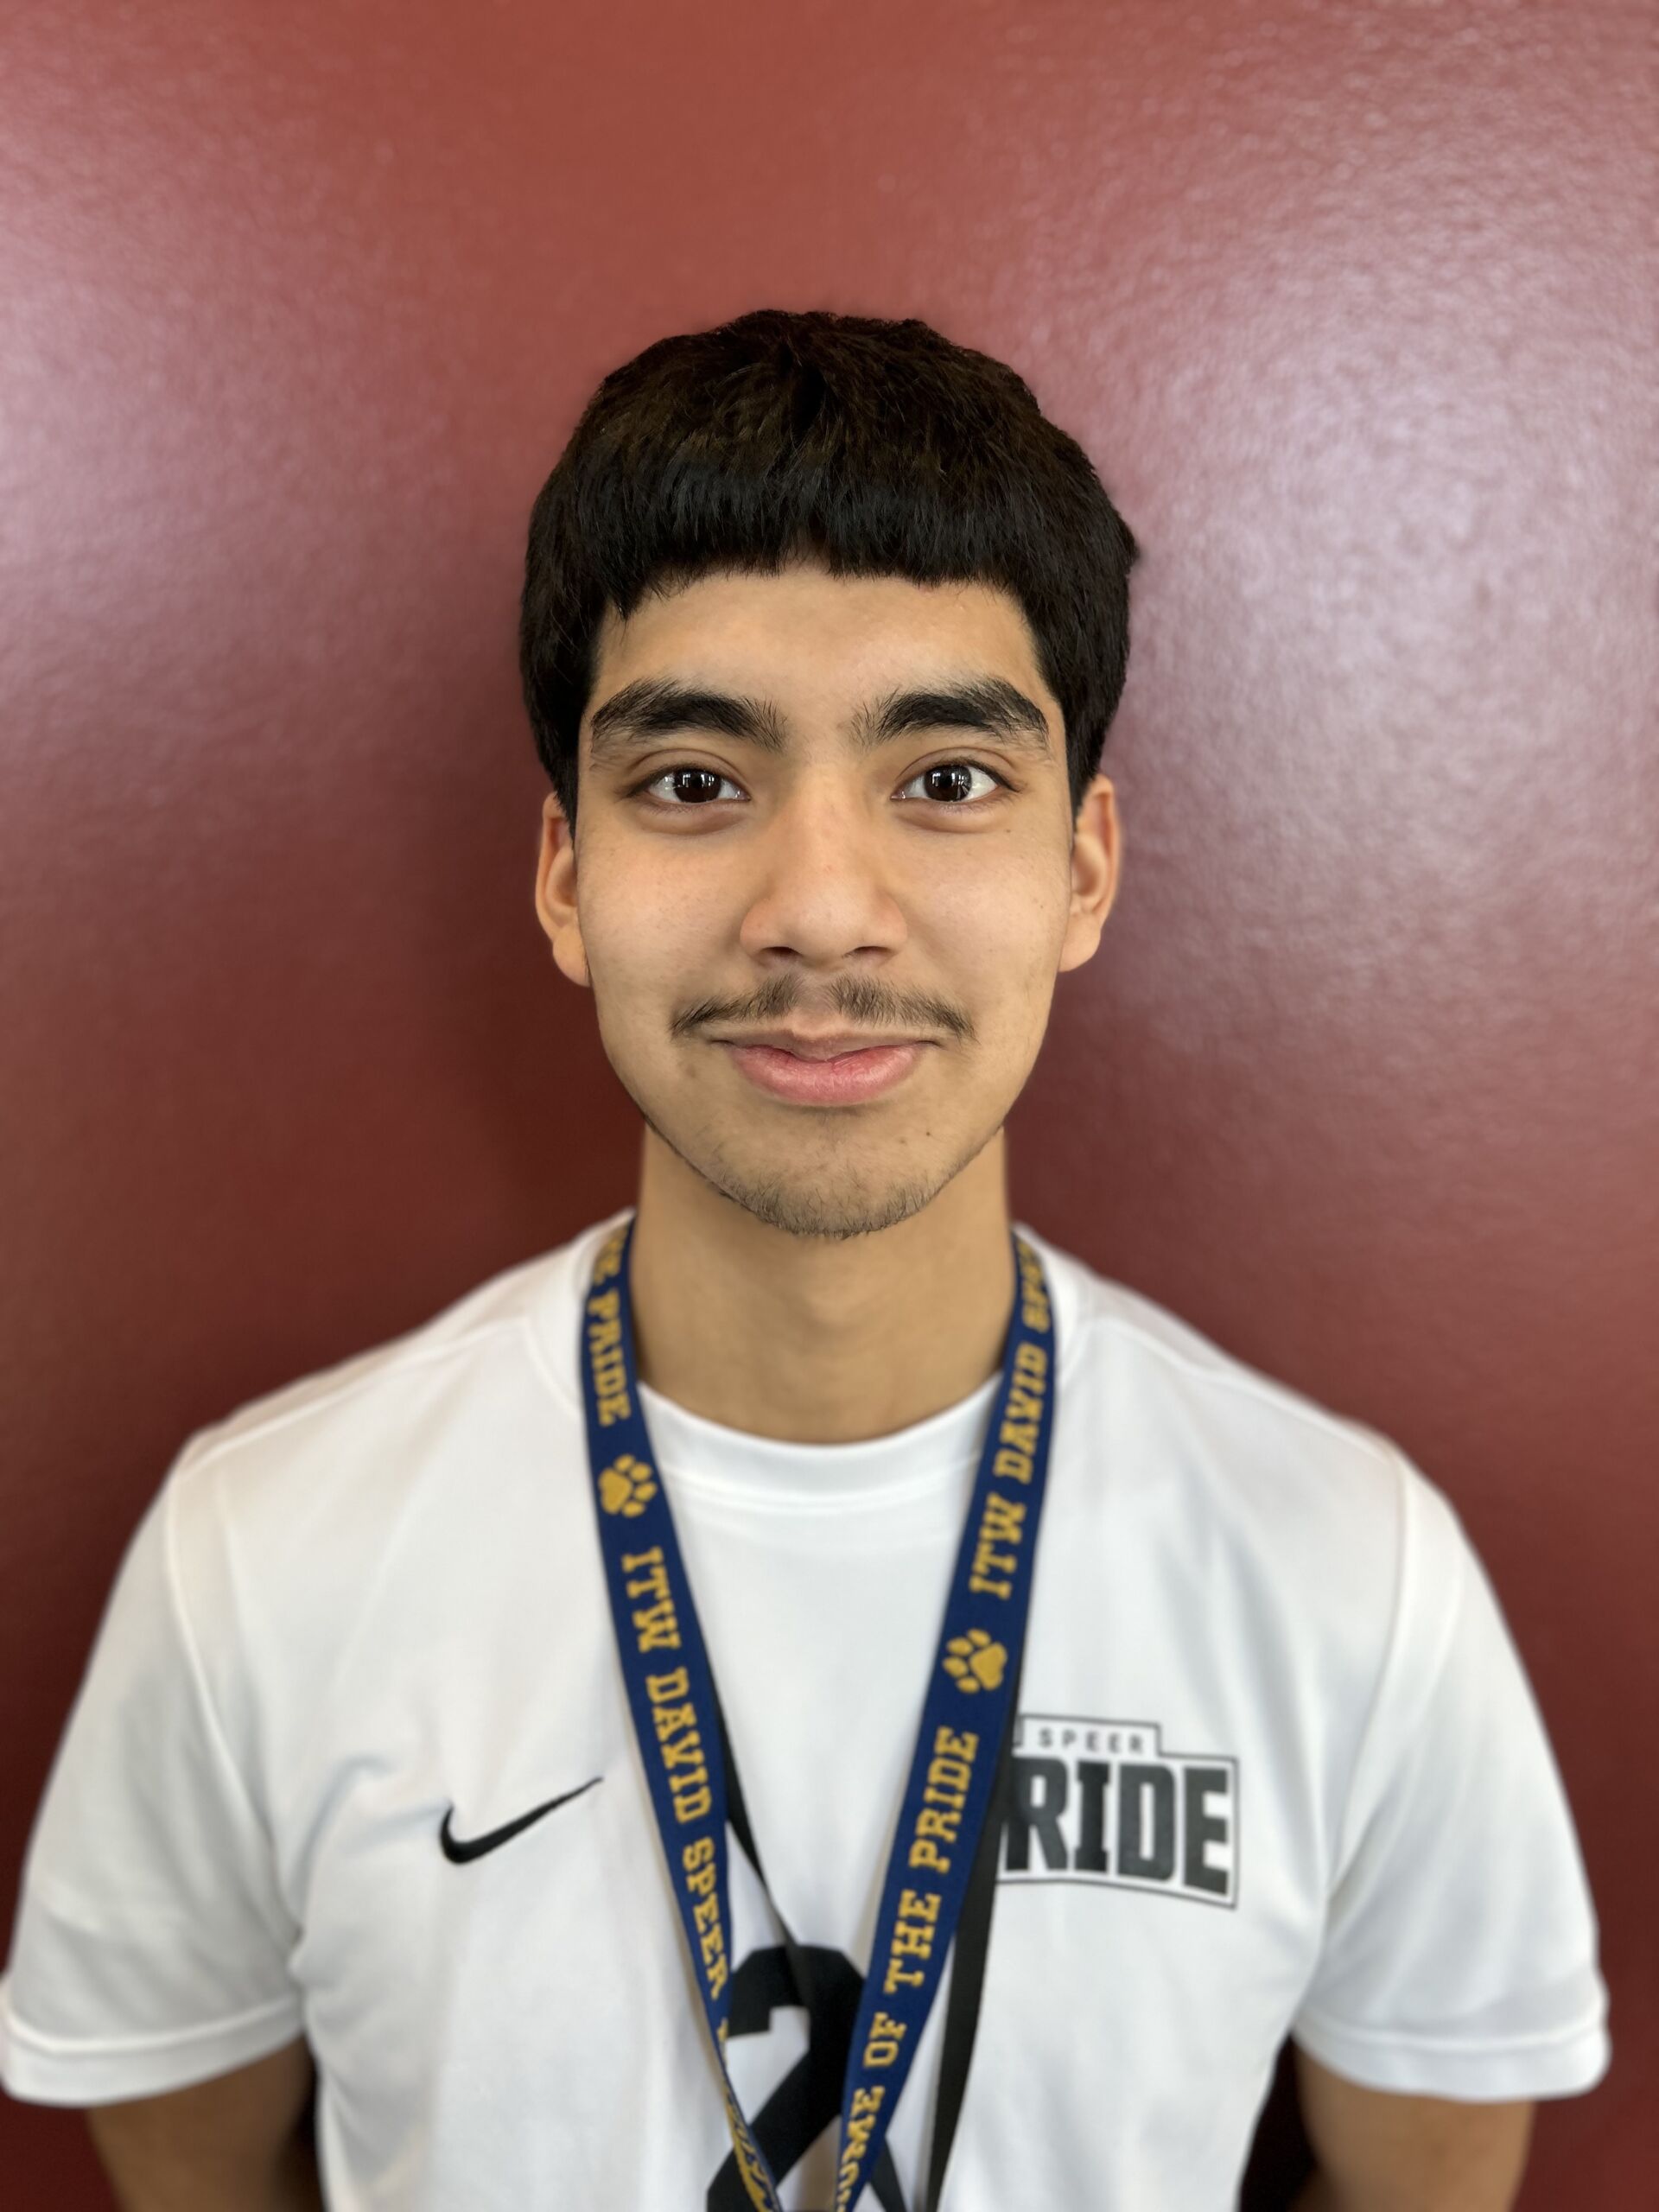 This photo shows a headshot of David Cano, a student at ITW David Speer Academy. He is a young Latine man with short hair. In this photo, he is smiling and wearing a white t-shirt with the Speer Pride logo on it.